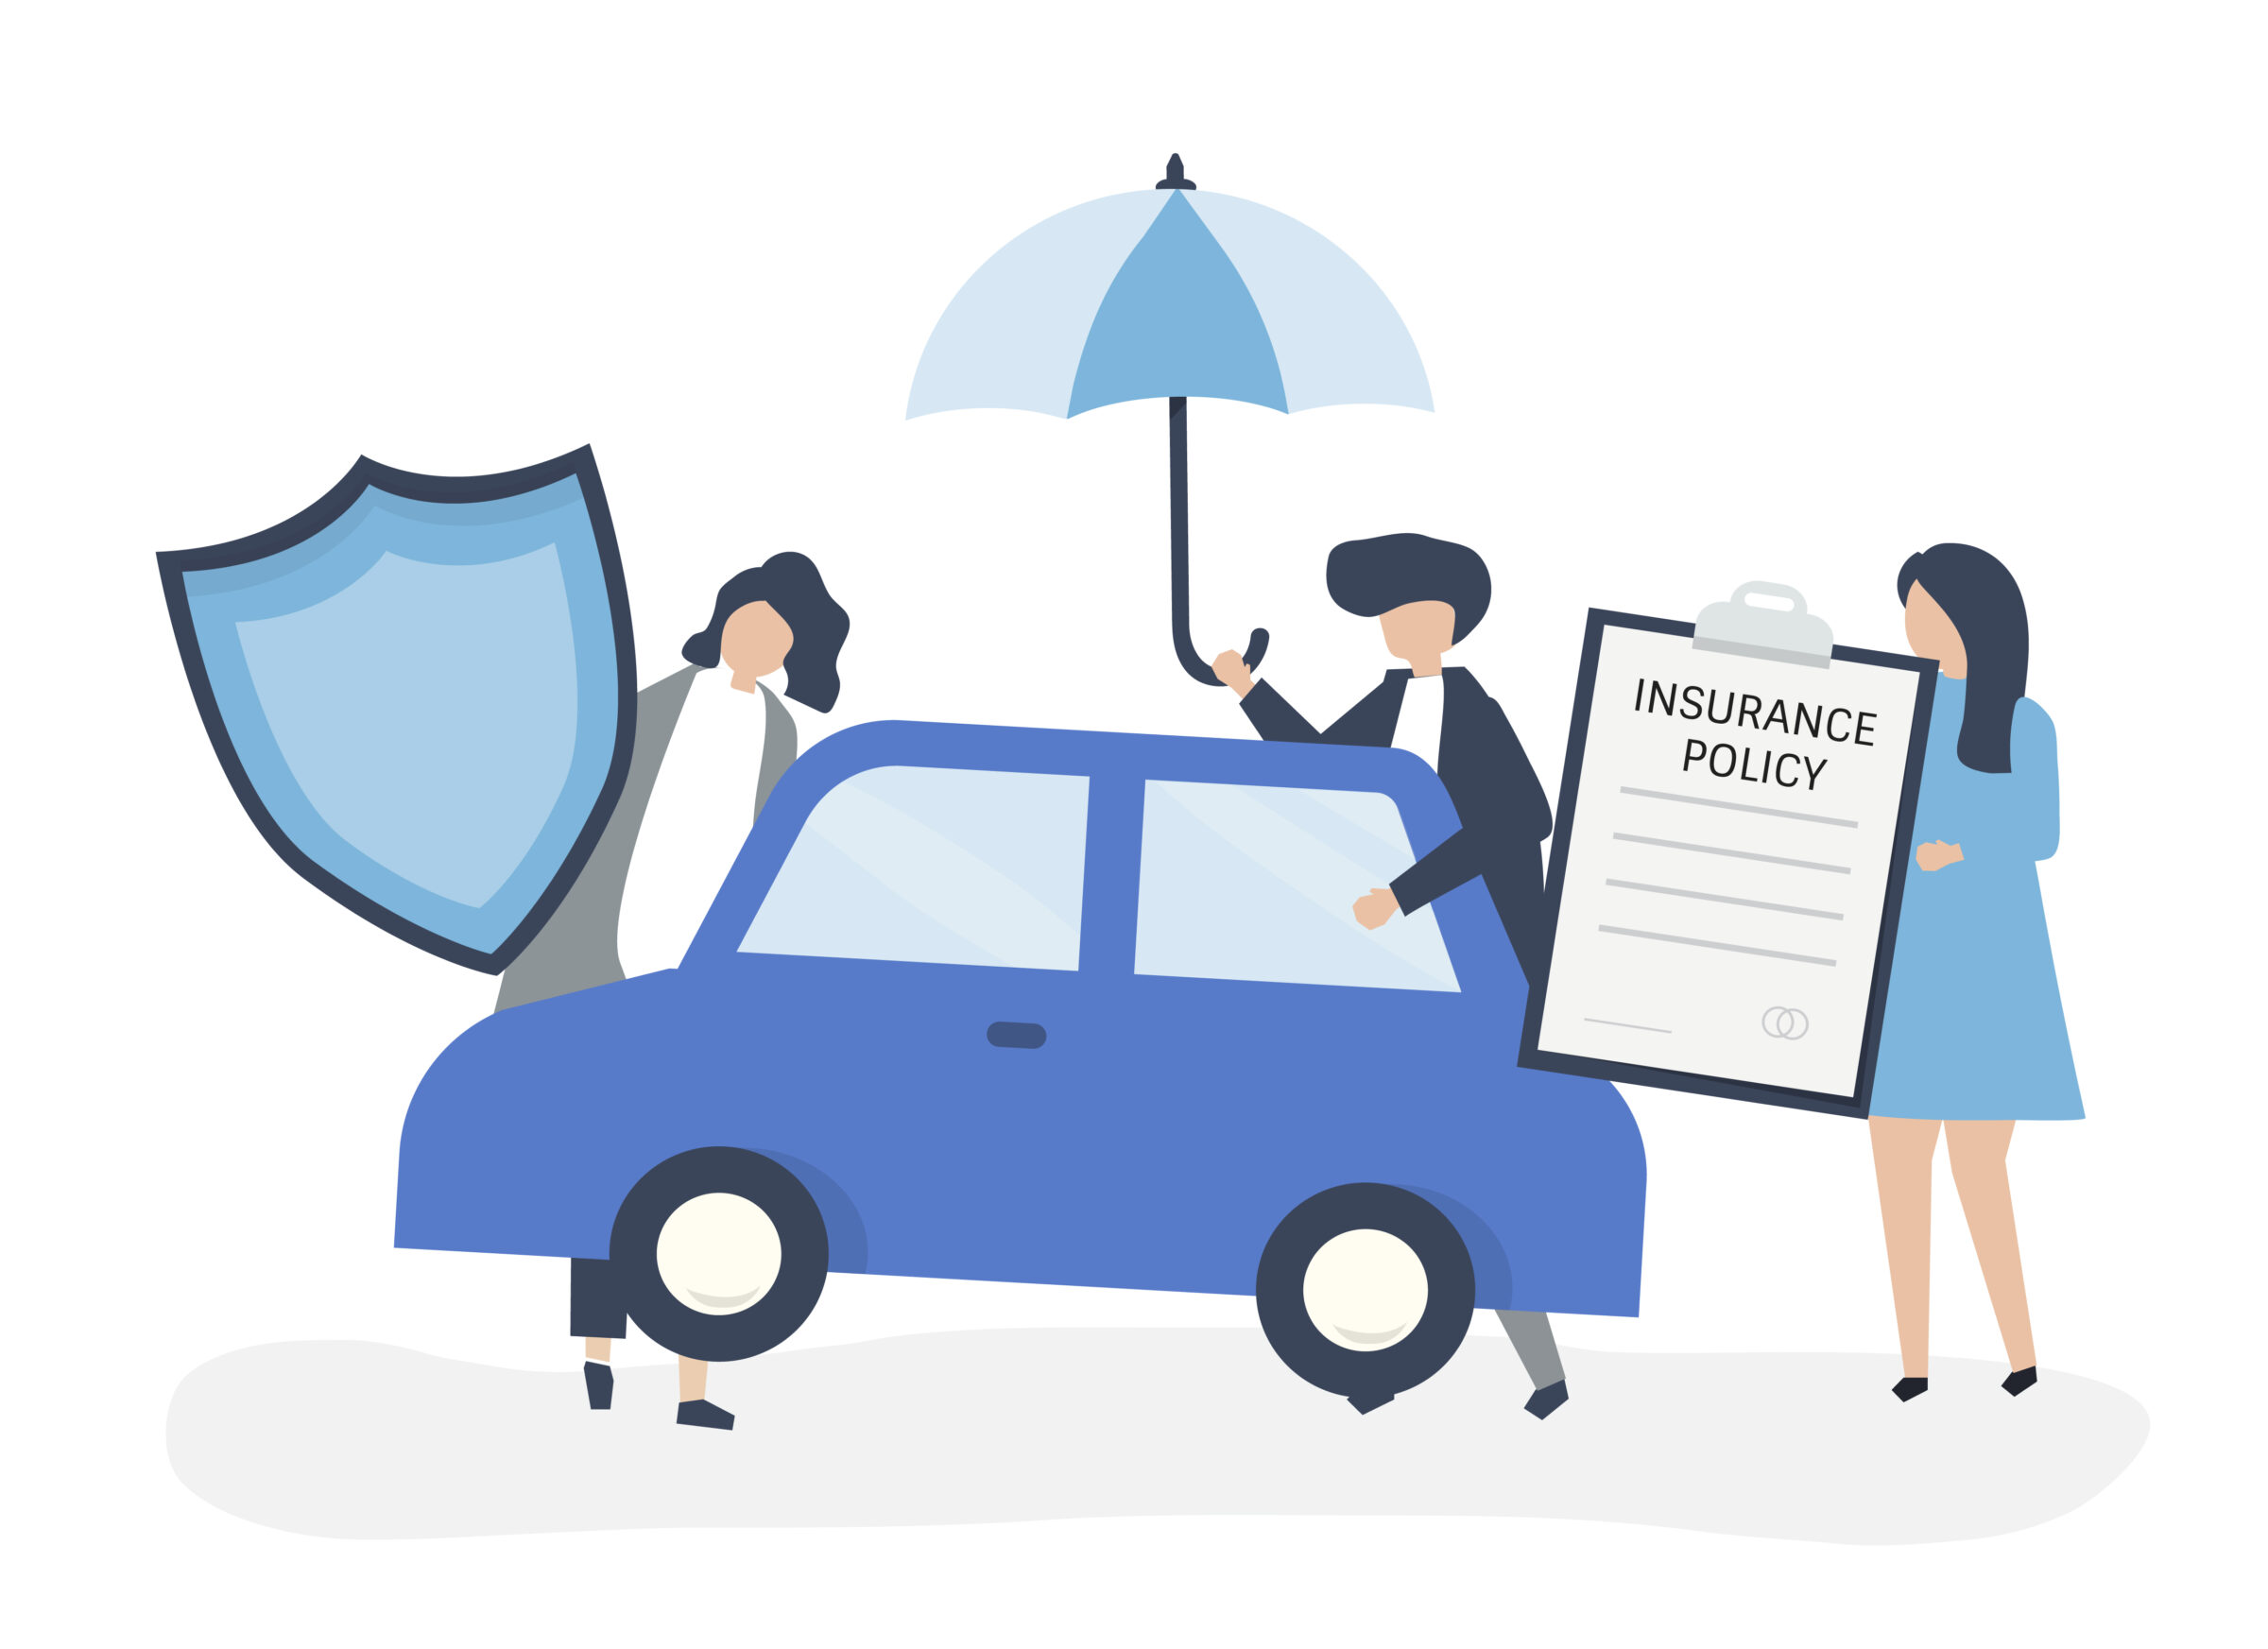 ICBC No Fault Insurance Model Explained